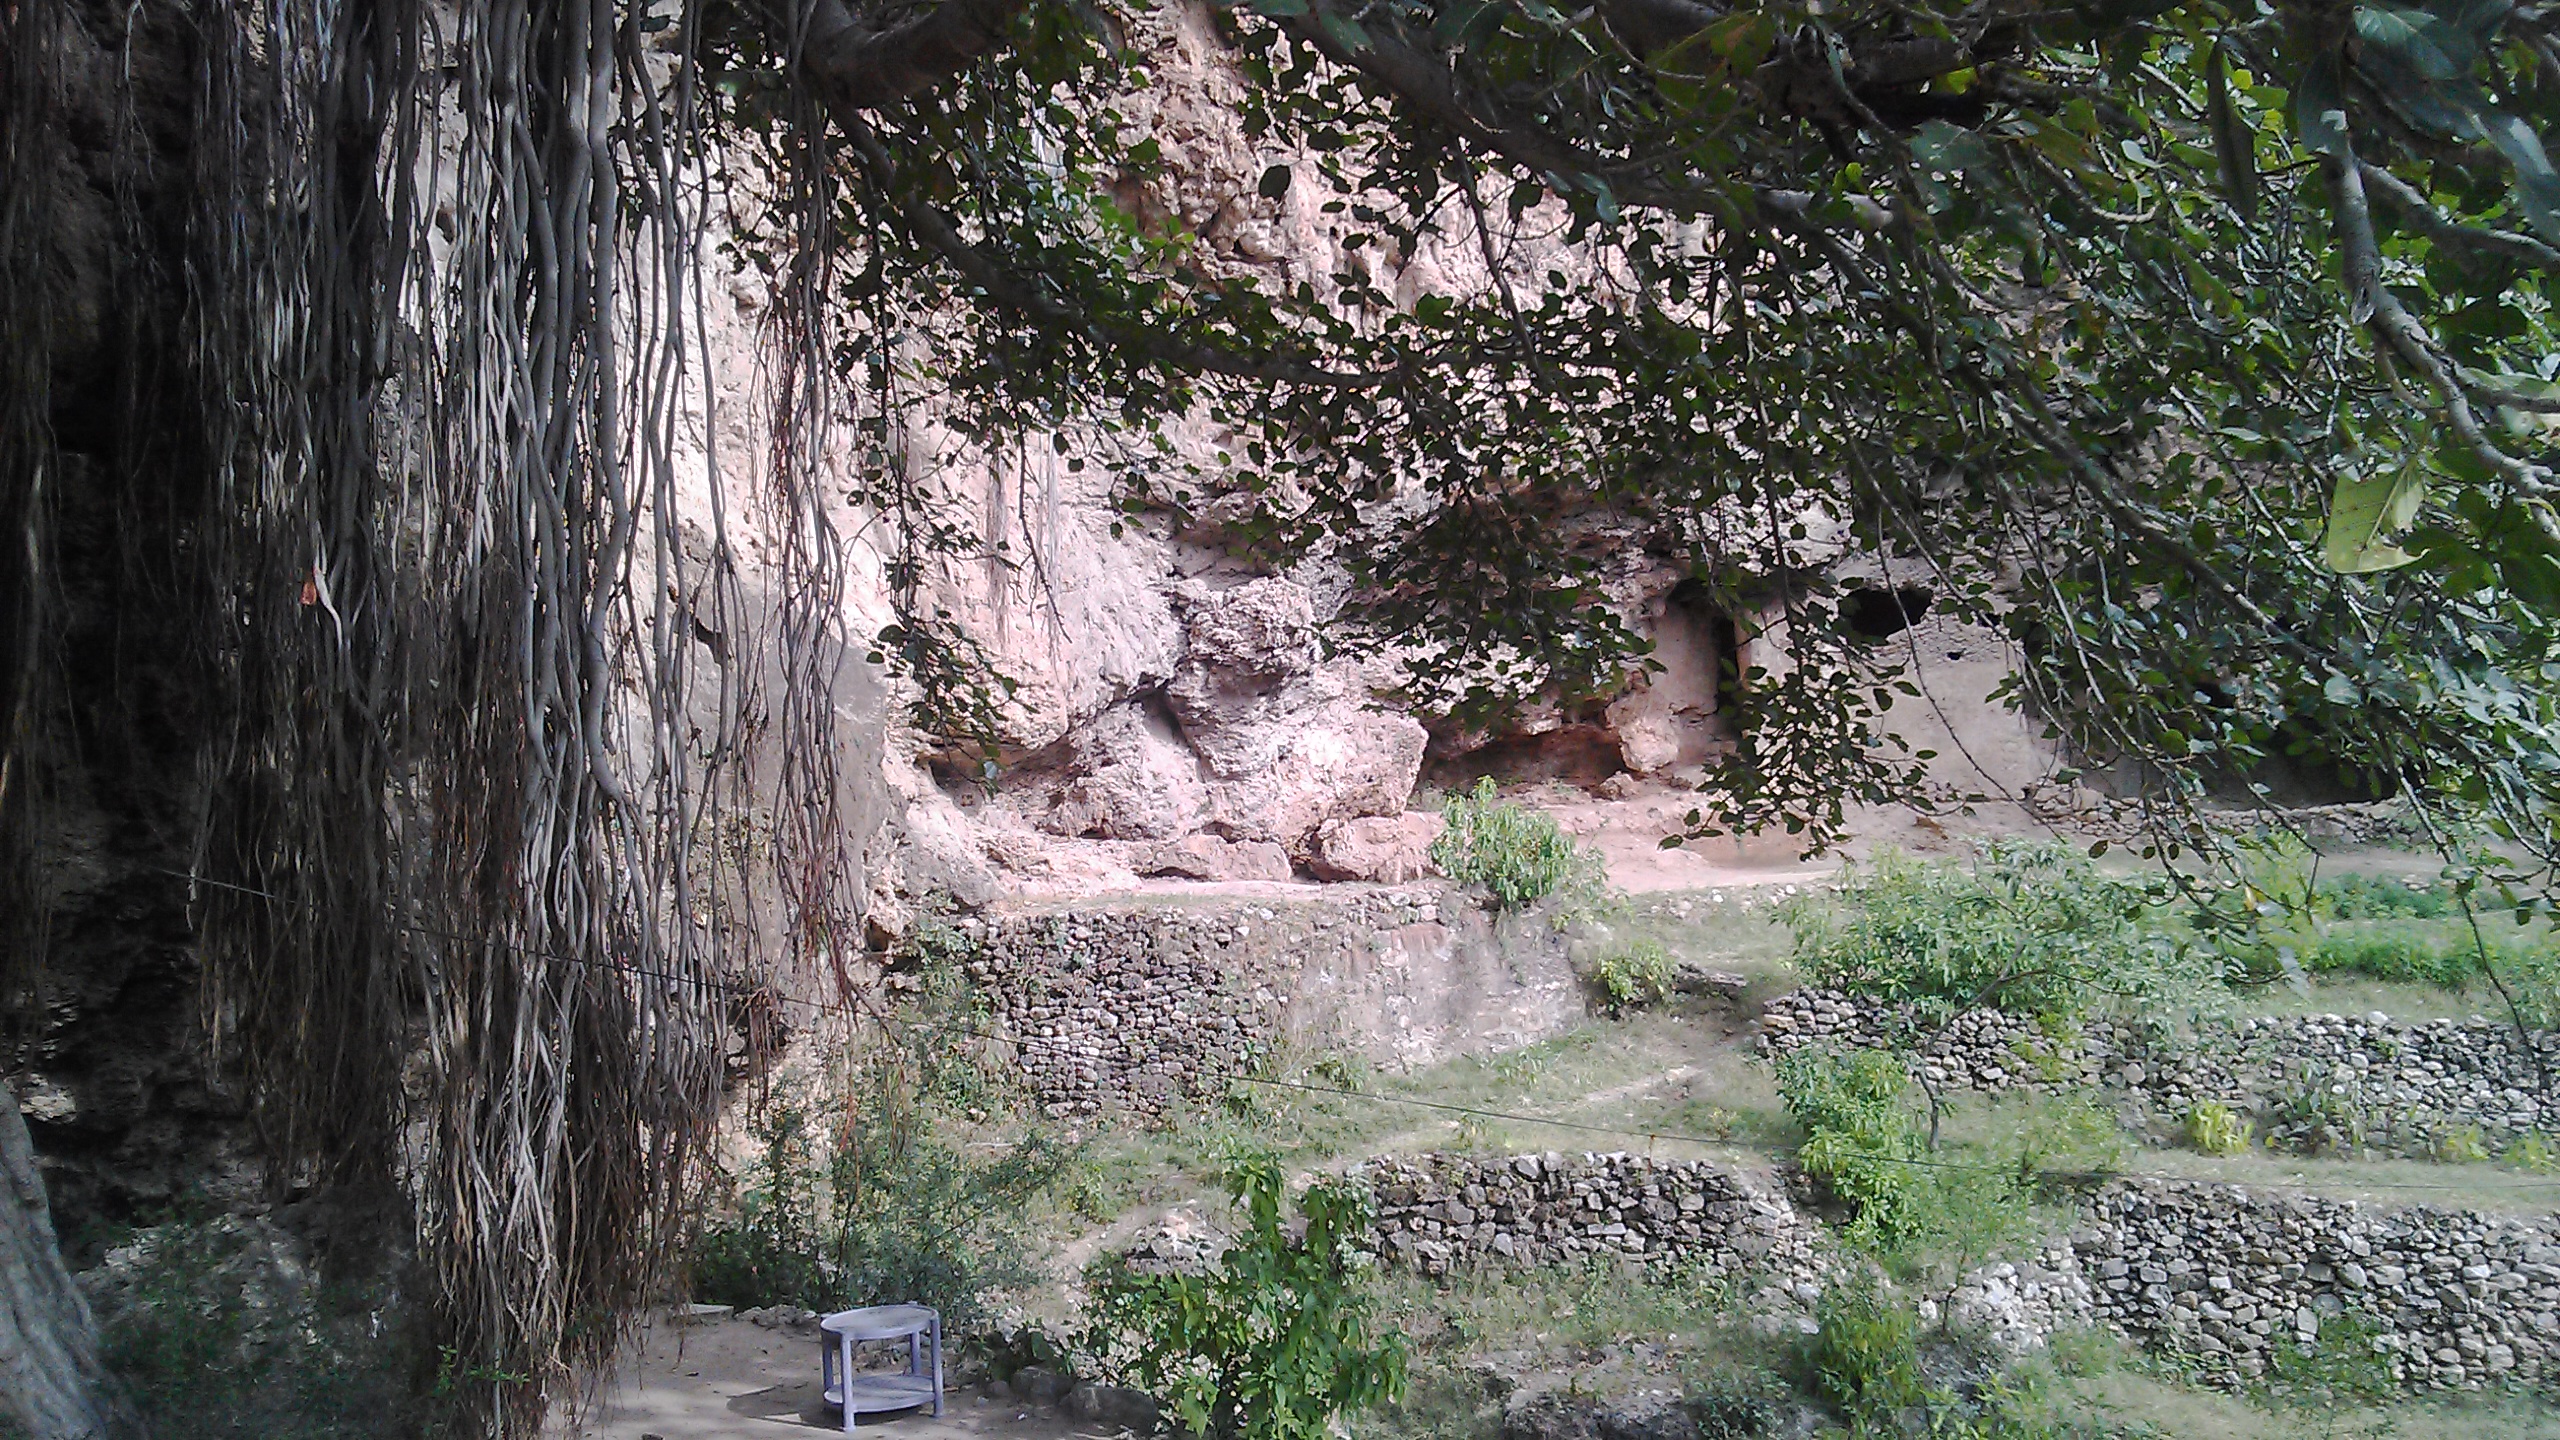 File:Side view of Shah Allah Ditta cave.jpg - Wikimedia Commons